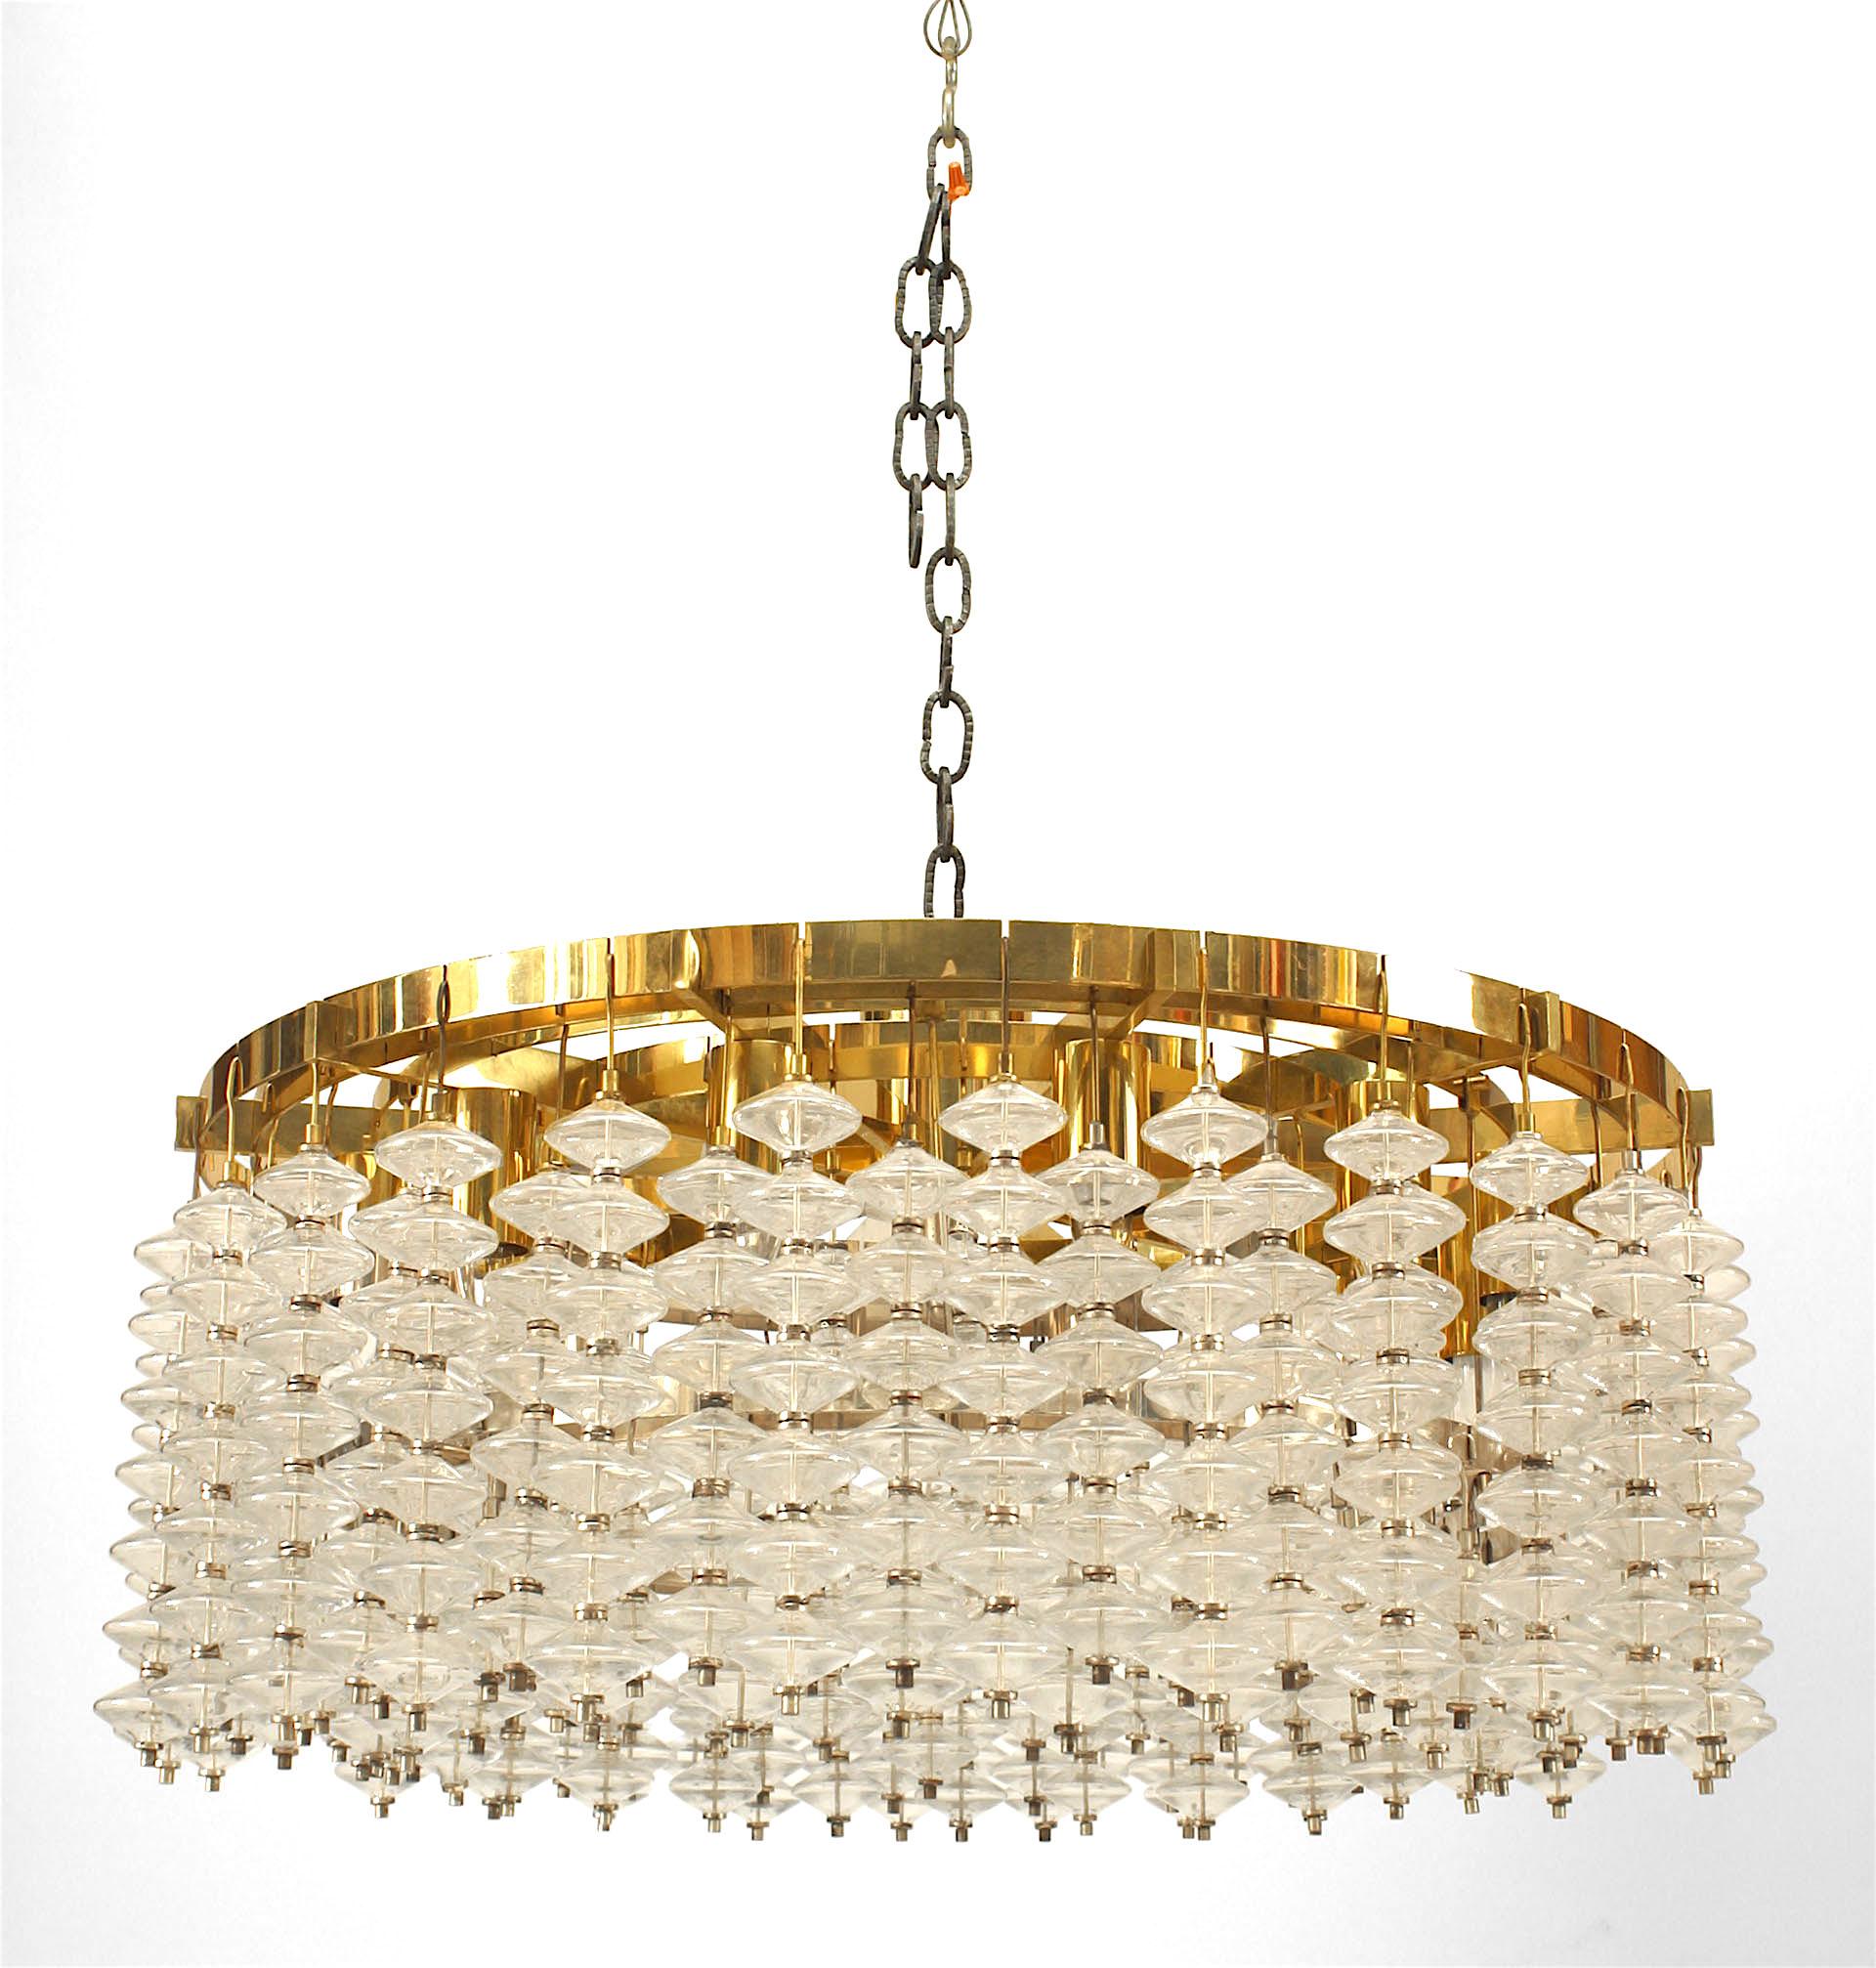 Italian chandelier 'modern' whose brass frame forms five concentric circles from which rods adorned with bubble form glass balls emanate in vertical suspension.

Priced each, two chandeliers left.

